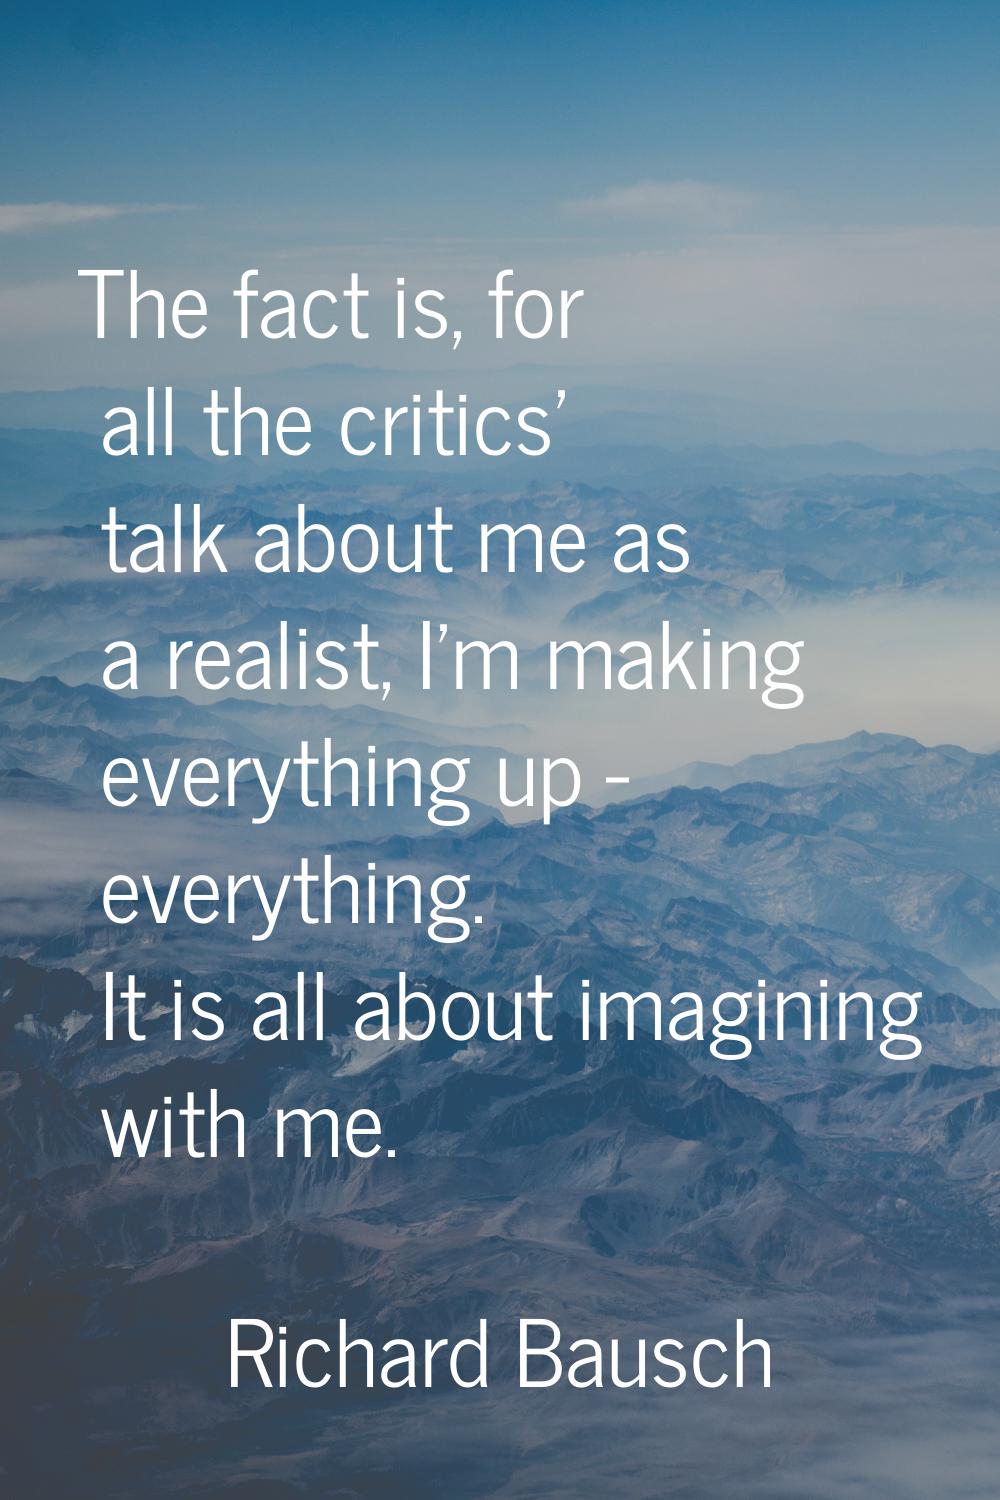 The fact is, for all the critics' talk about me as a realist, I'm making everything up - everything